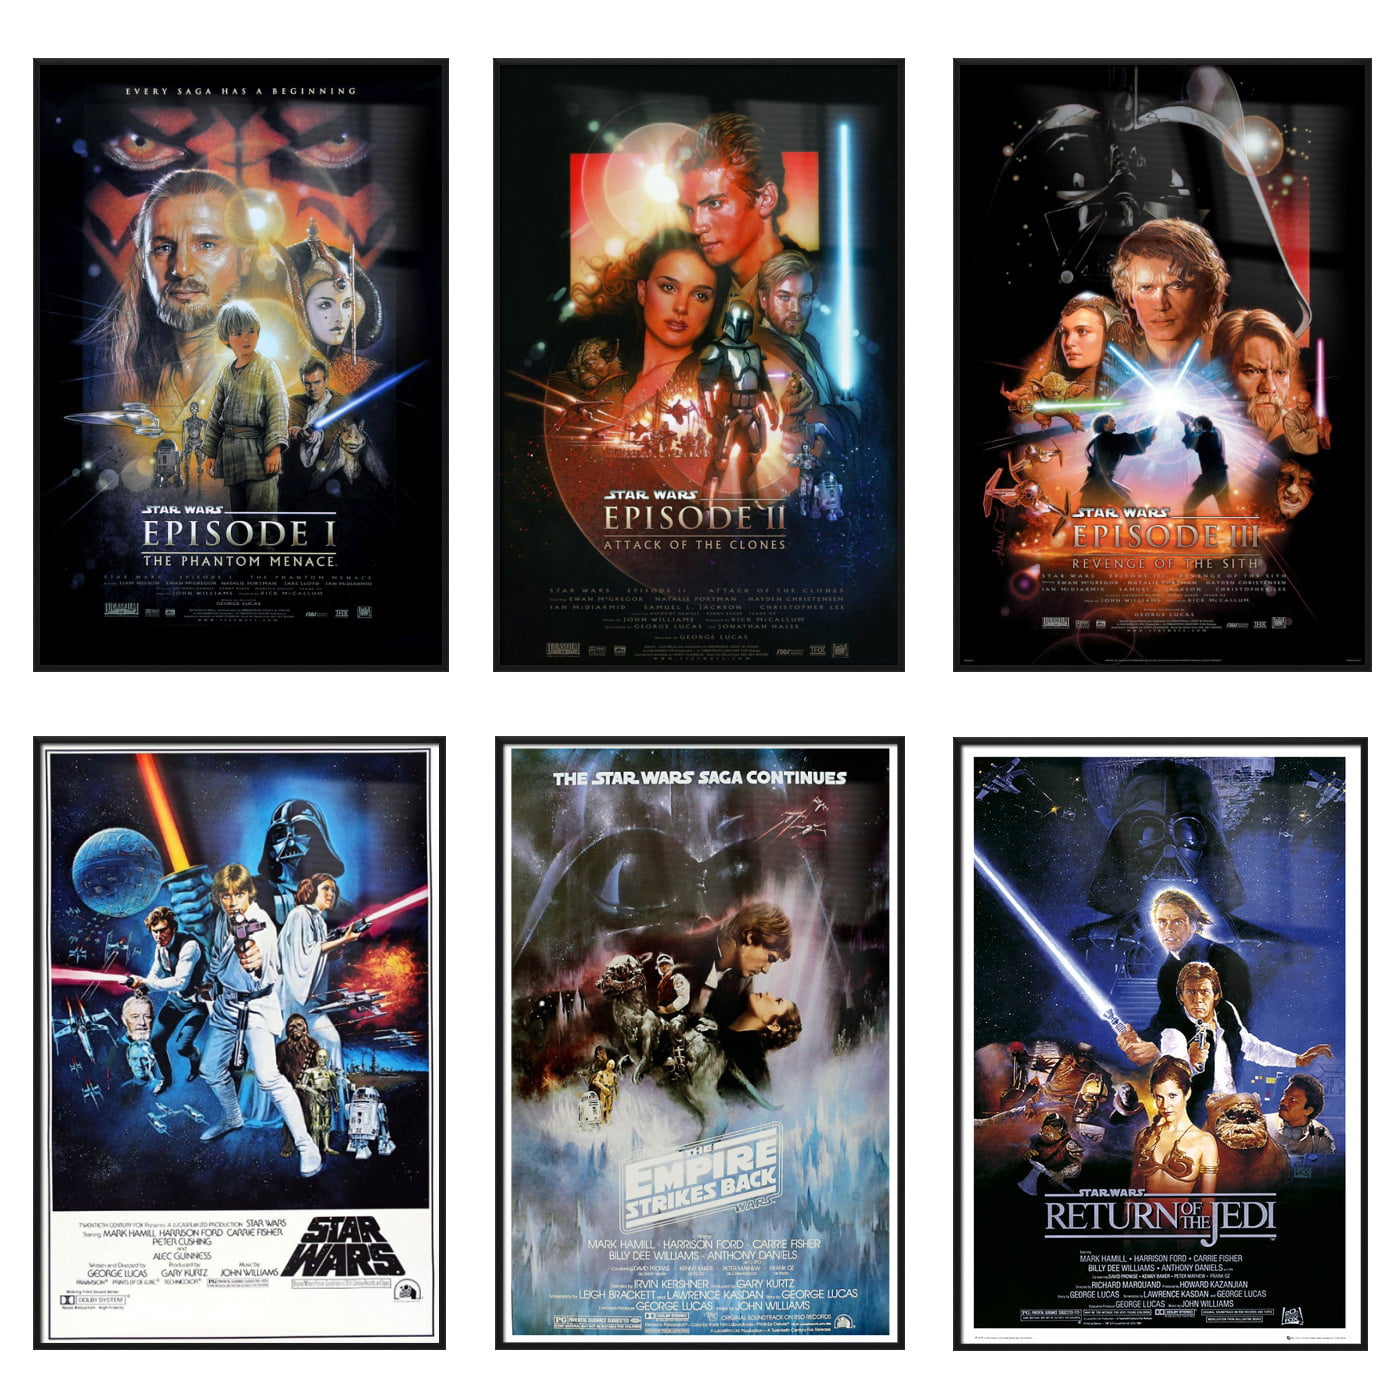 STAR WARS Movie Poster Classic Full Size 24x36 Print ~ Vintage Style A 